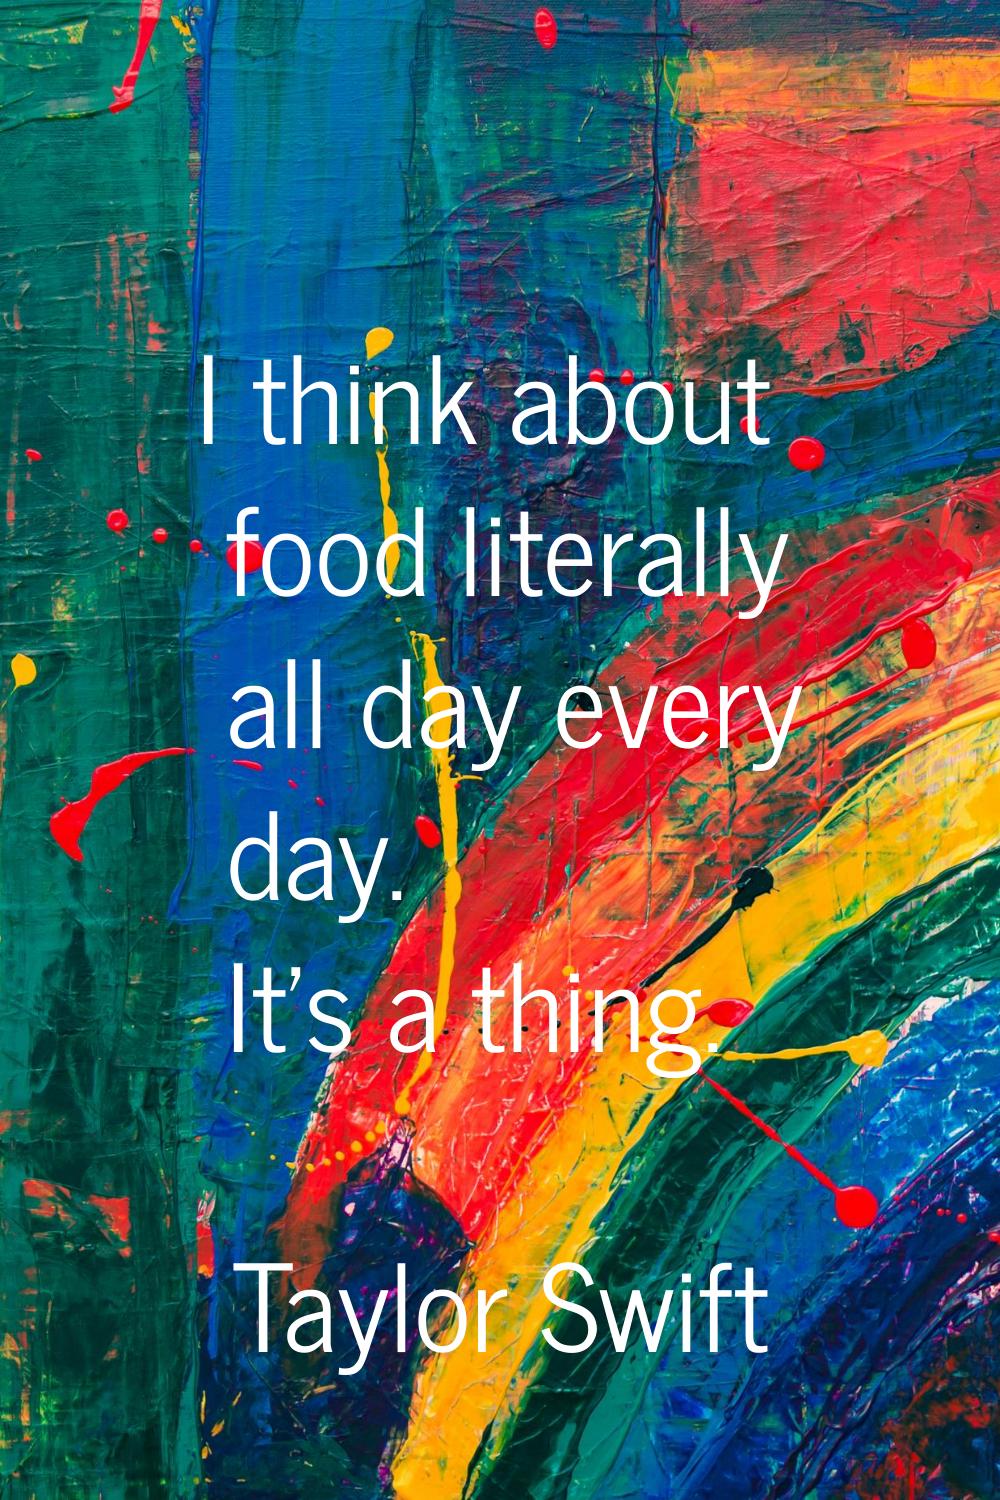 I think about food literally all day every day. It's a thing.